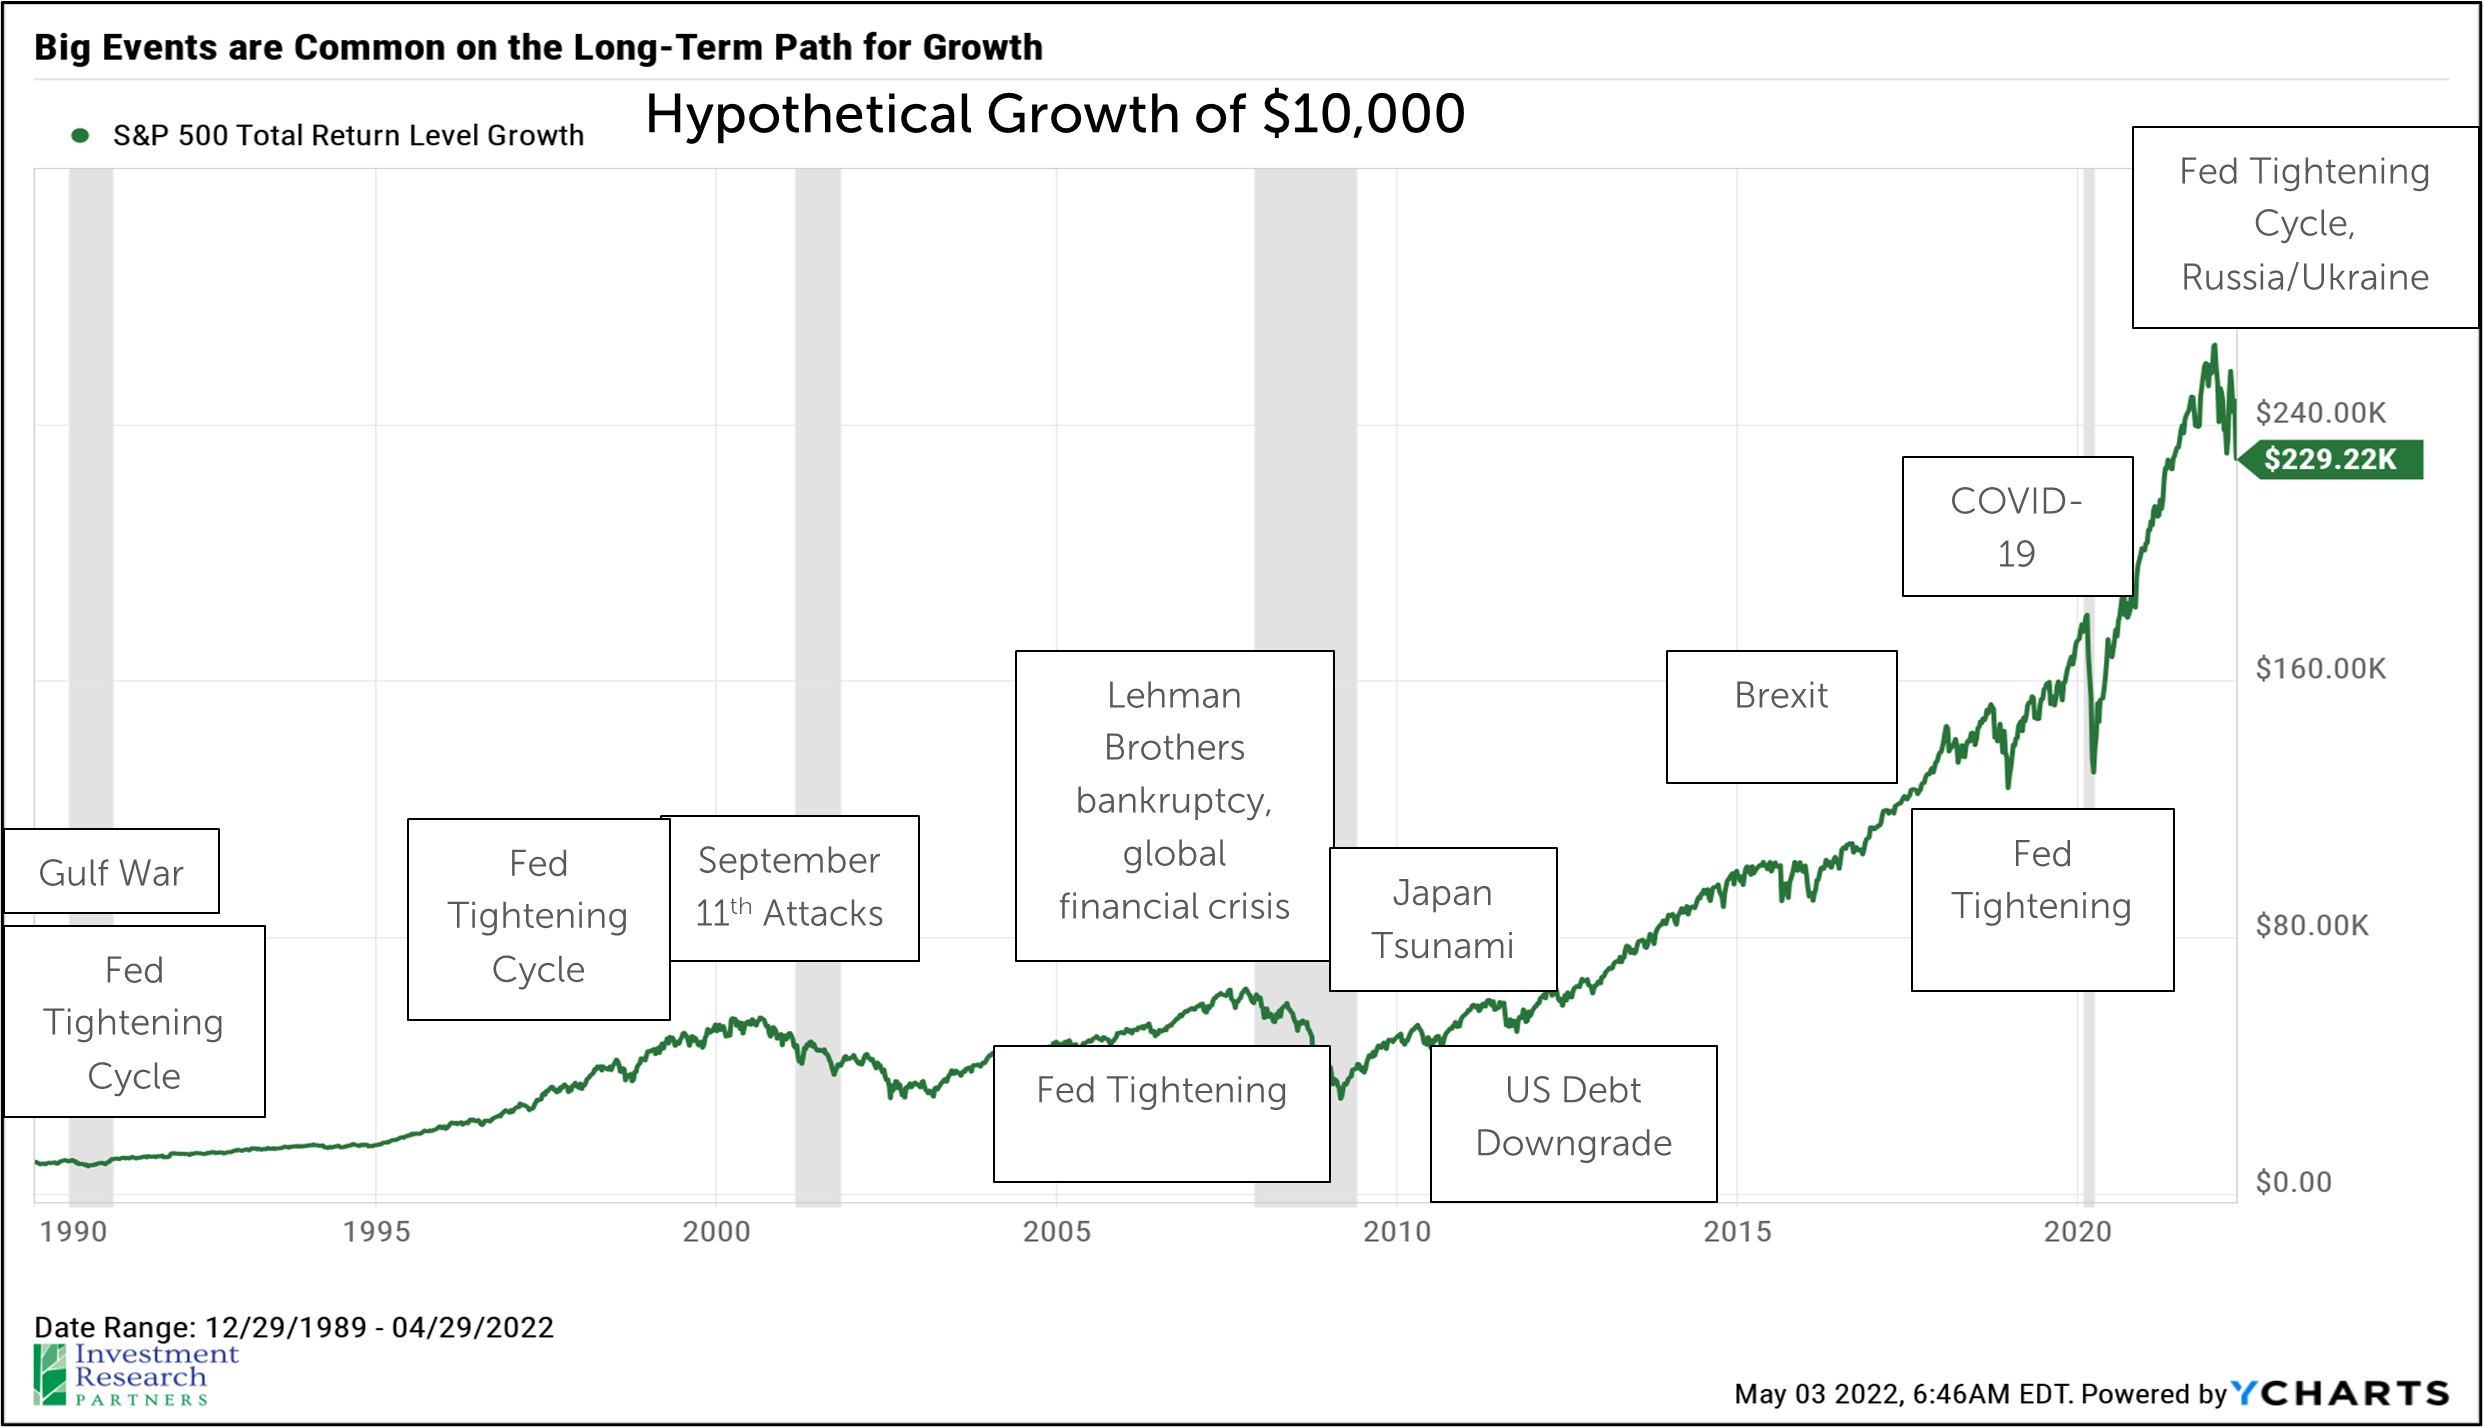 Line graph depicting Big Events are Common on the Long-Term Path for Growth